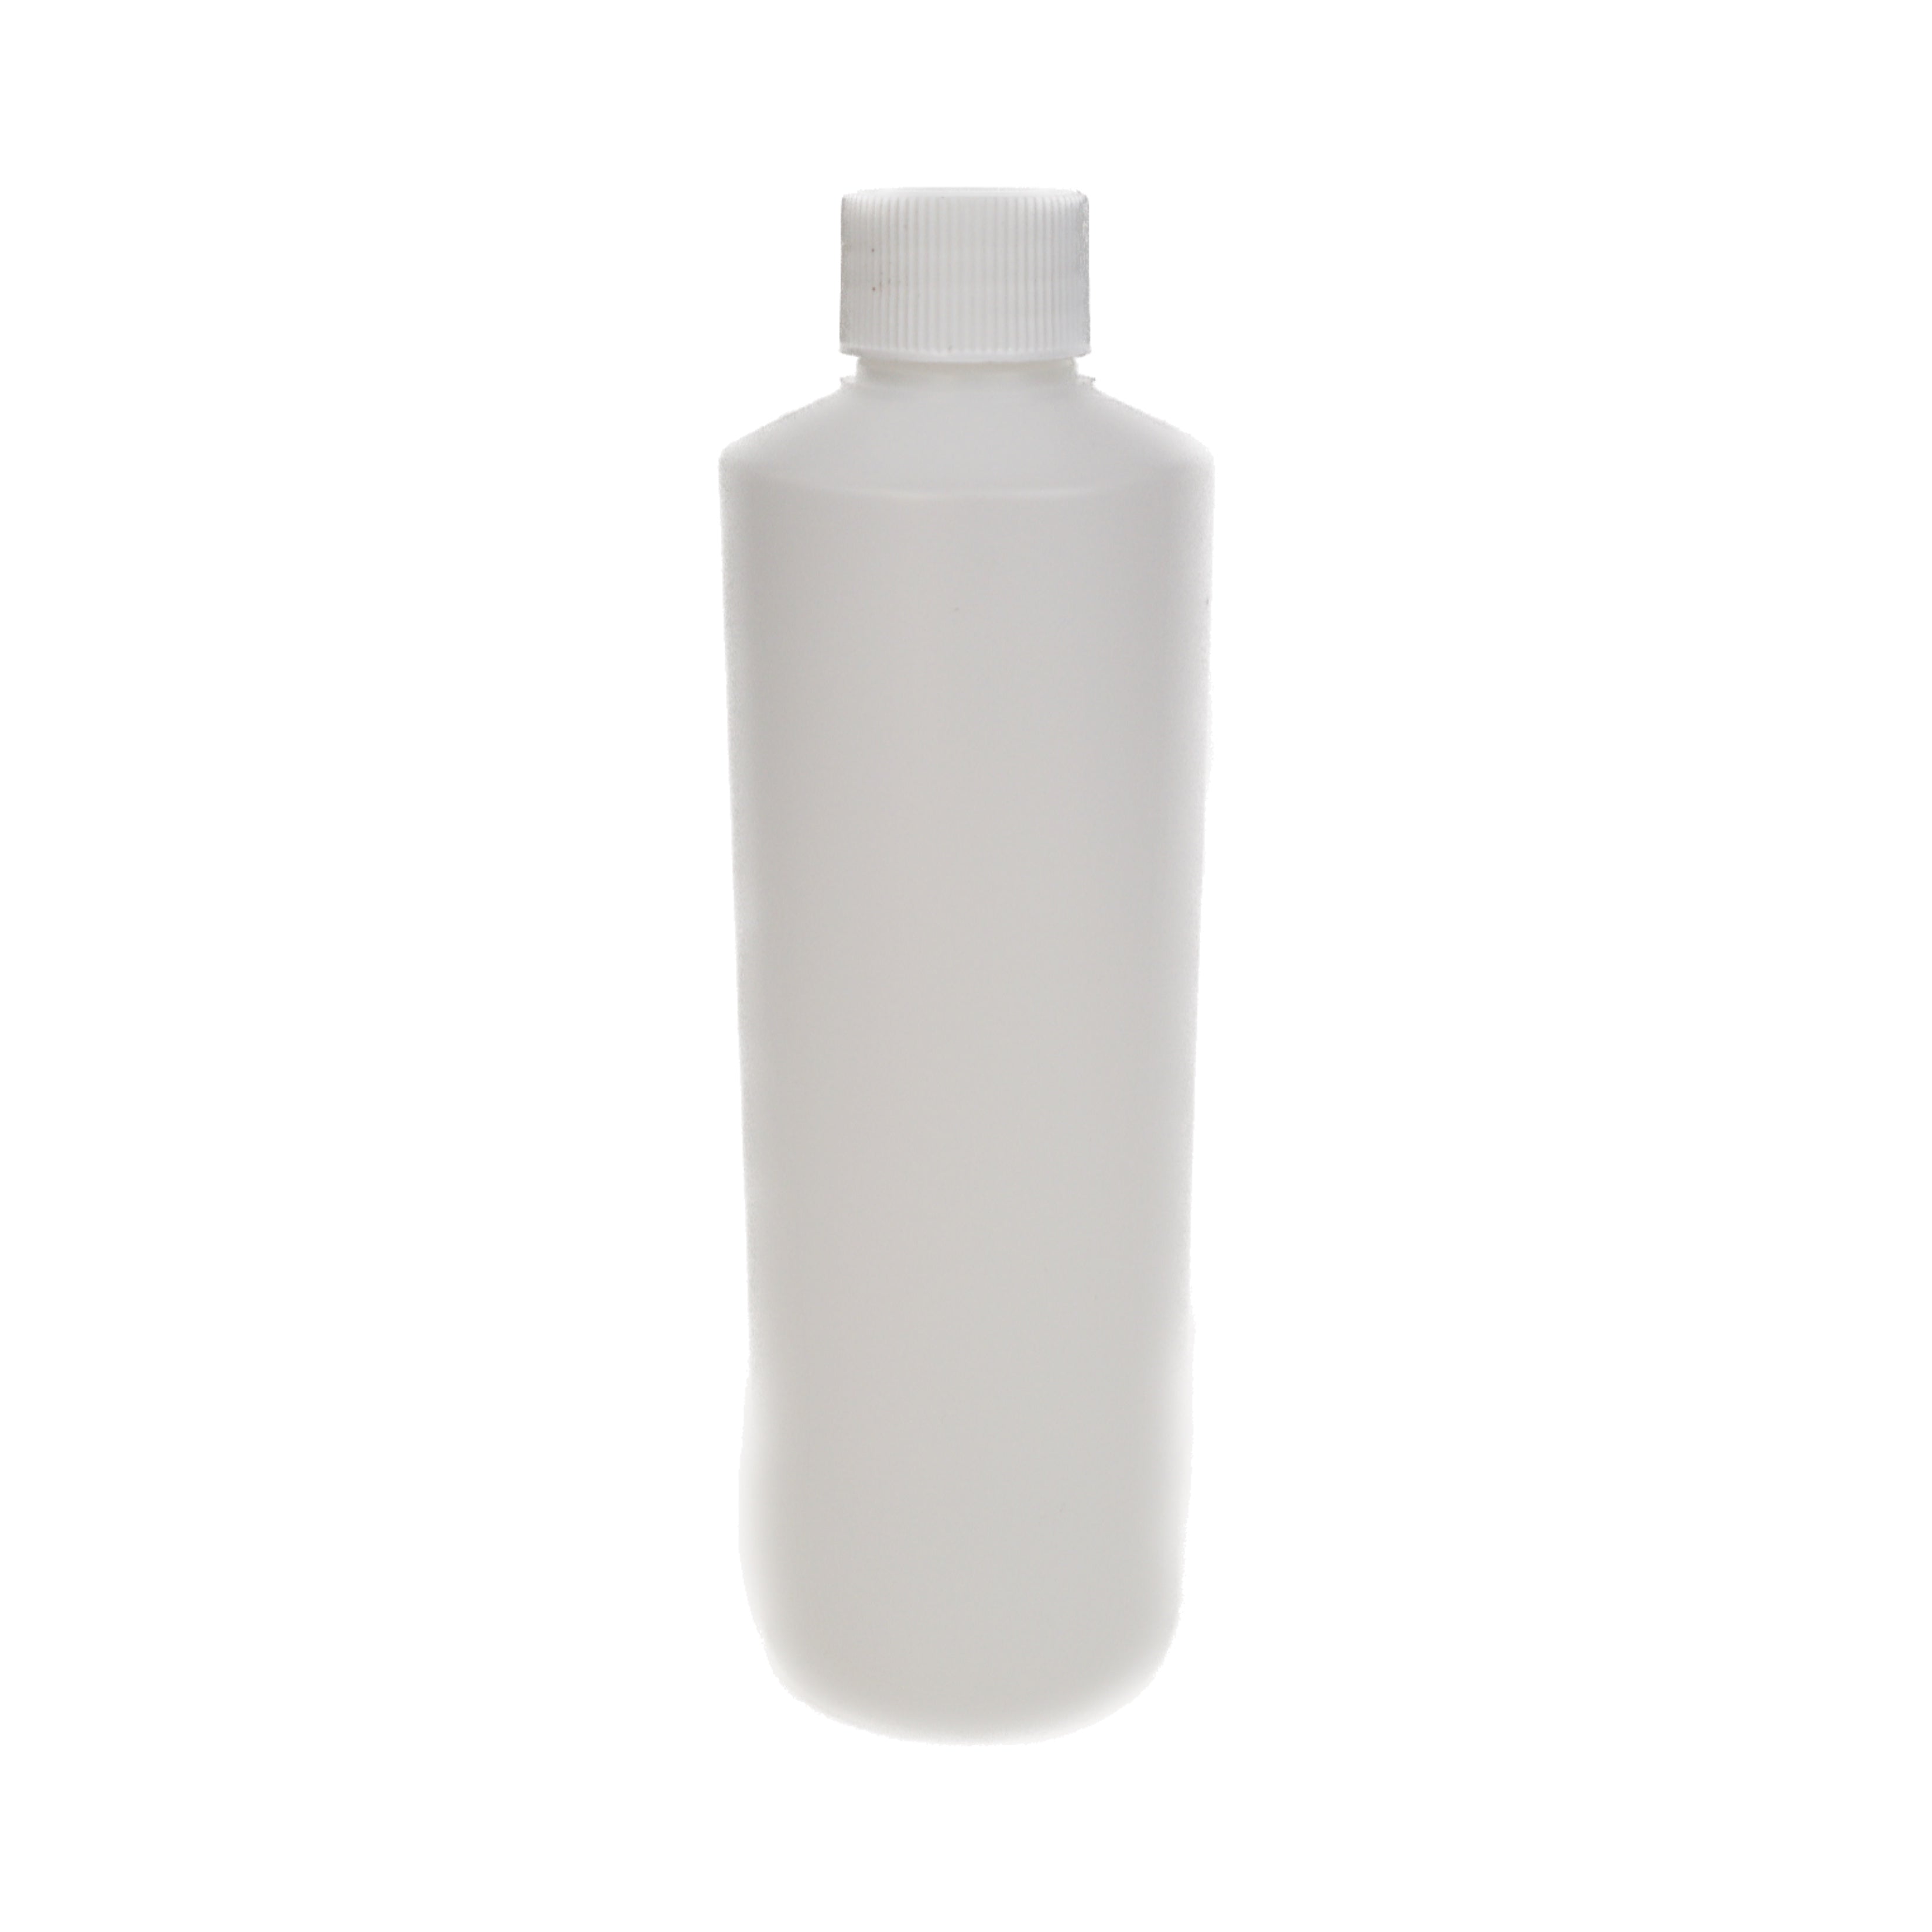 Spray bottle with lid